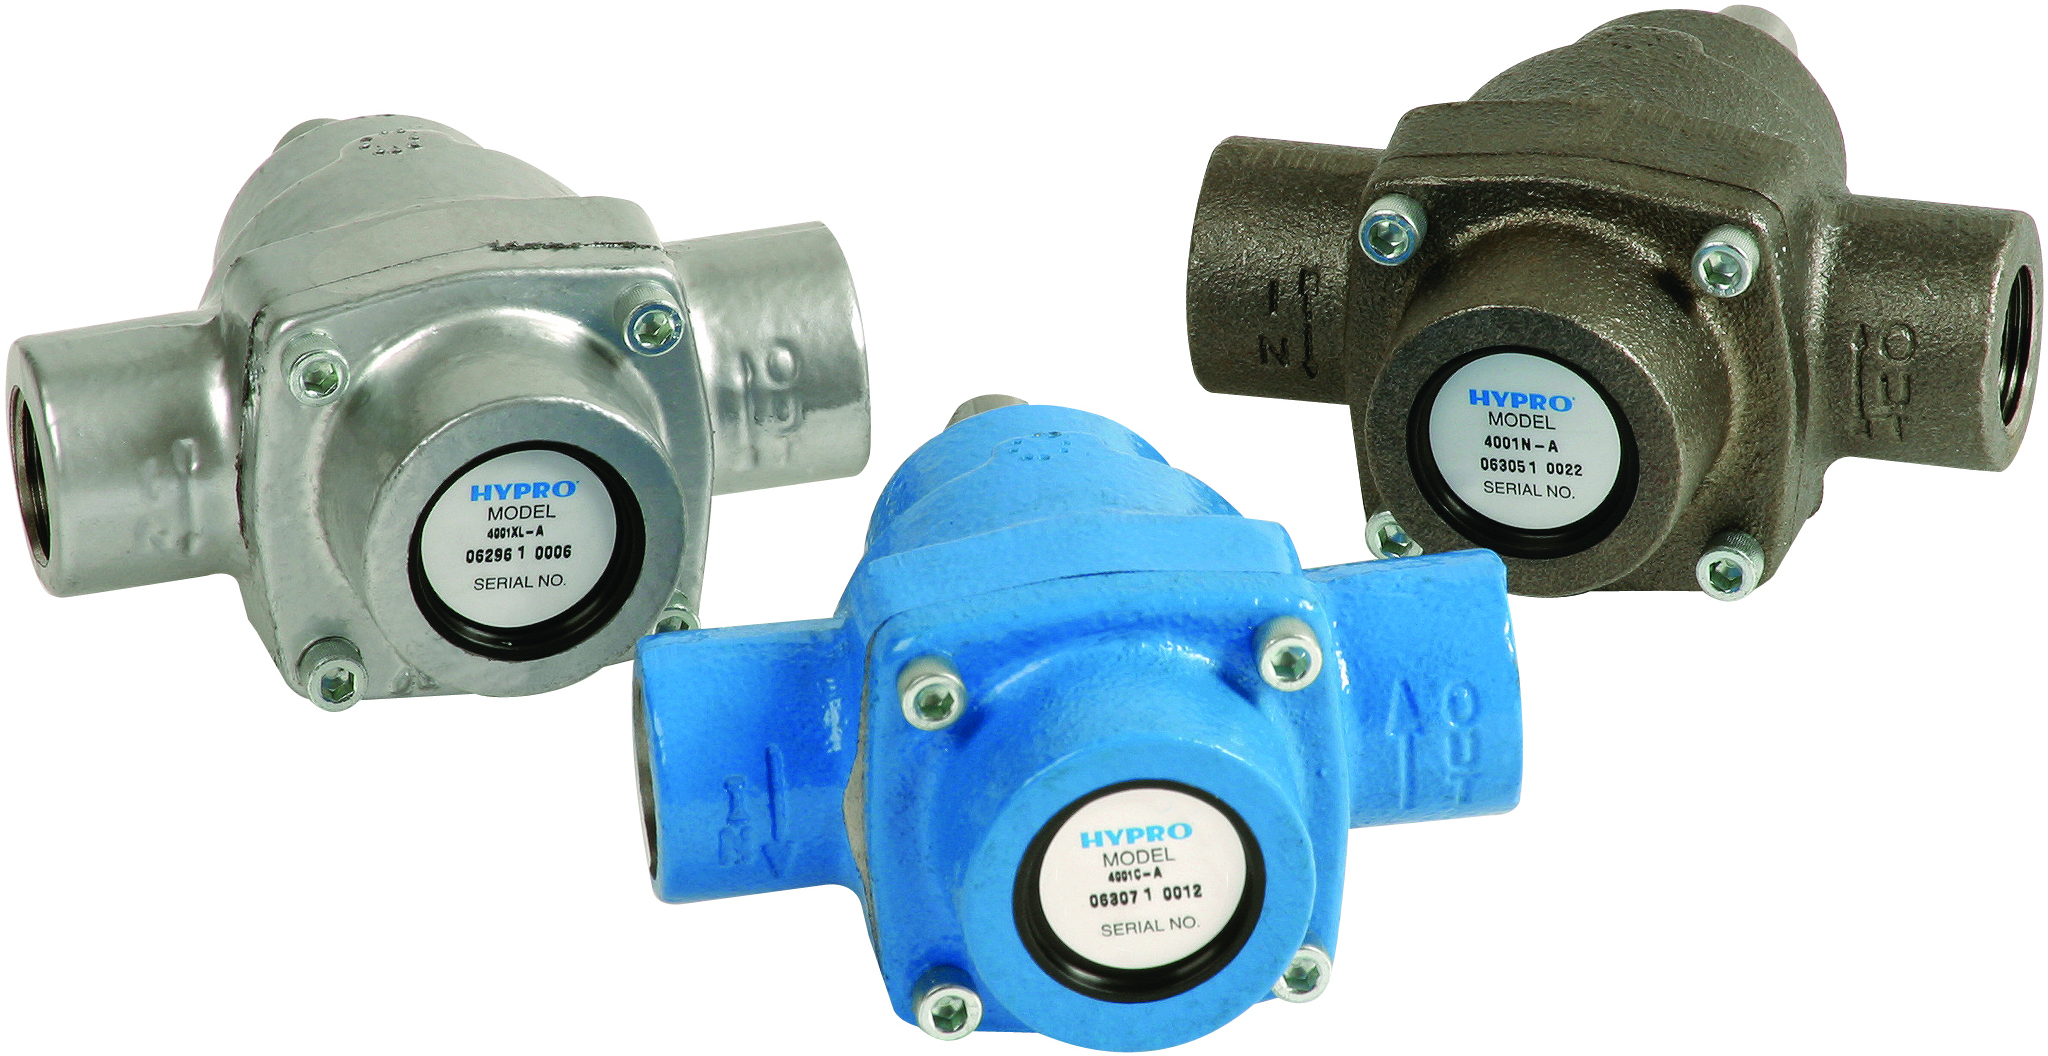 Hypro 4001 & 4101 Series - 4 Roller, Cast Iron, Ni-Resist or Silver Series XL Roller Pumps